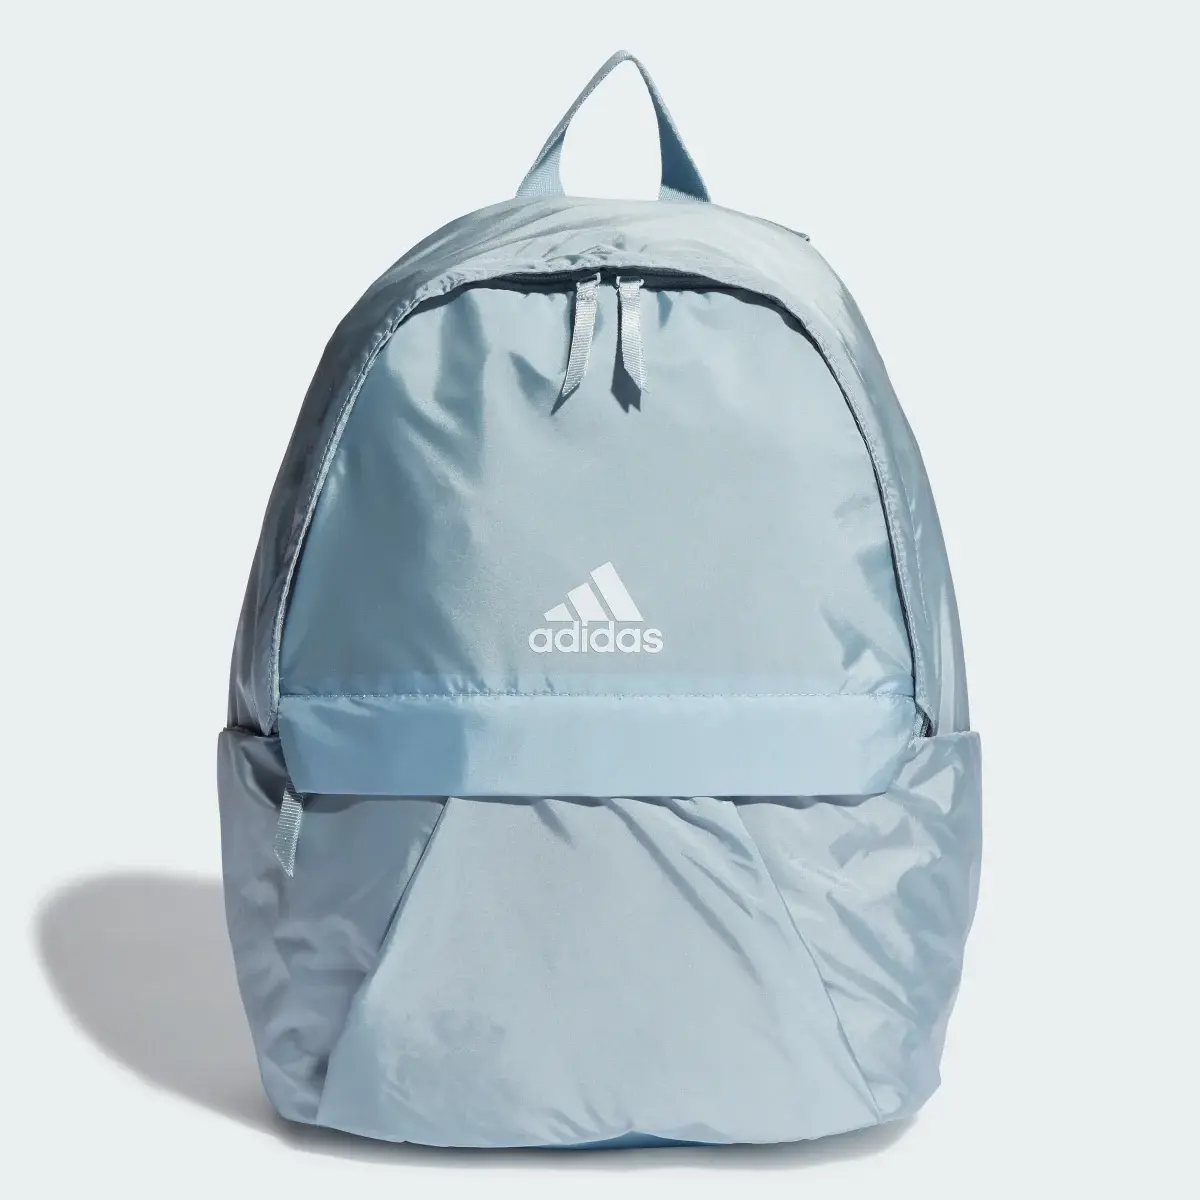 Adidas Classic Gen Z Backpack. 1